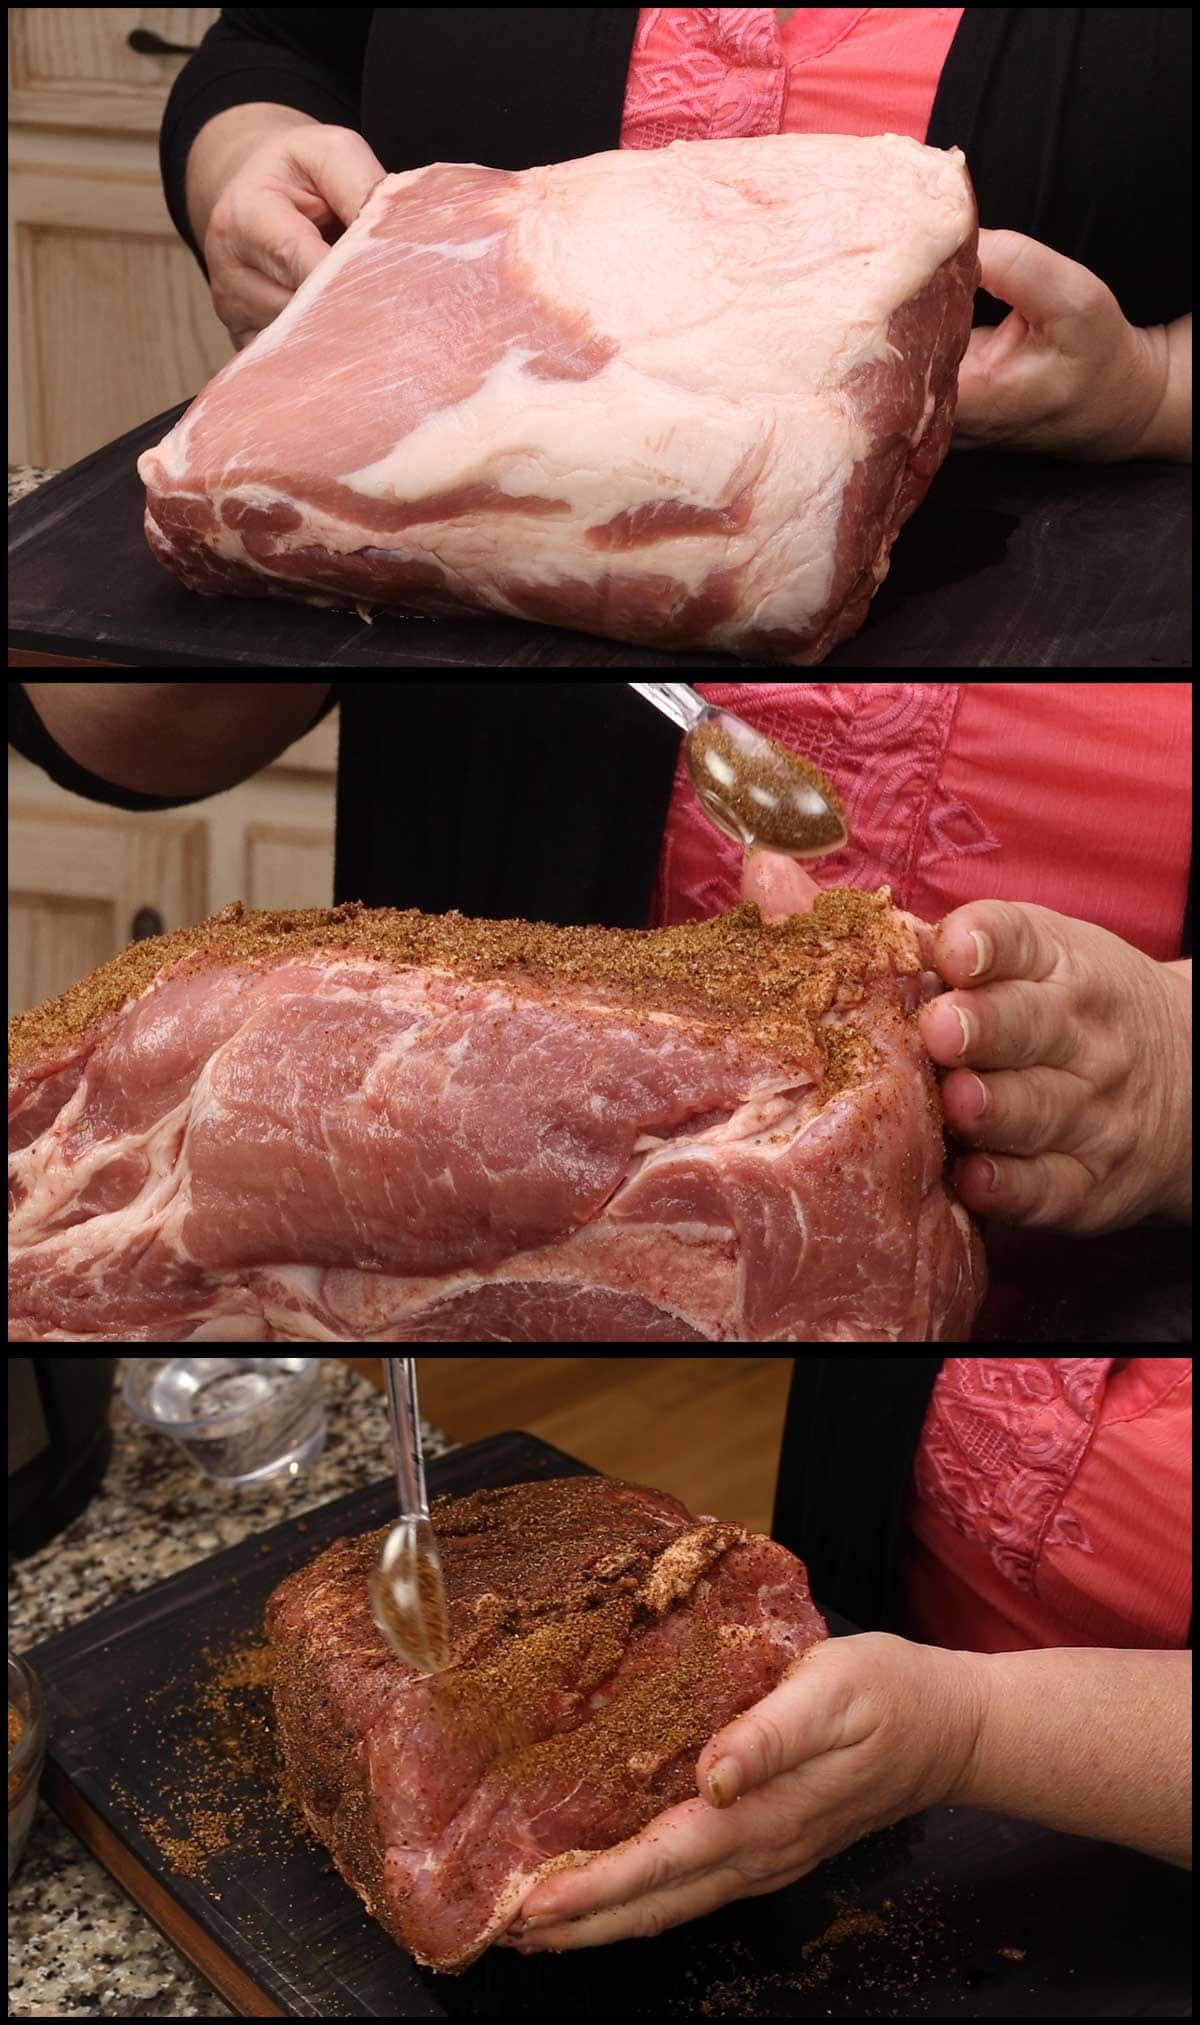 rubbing the pork with seasoning before cooking